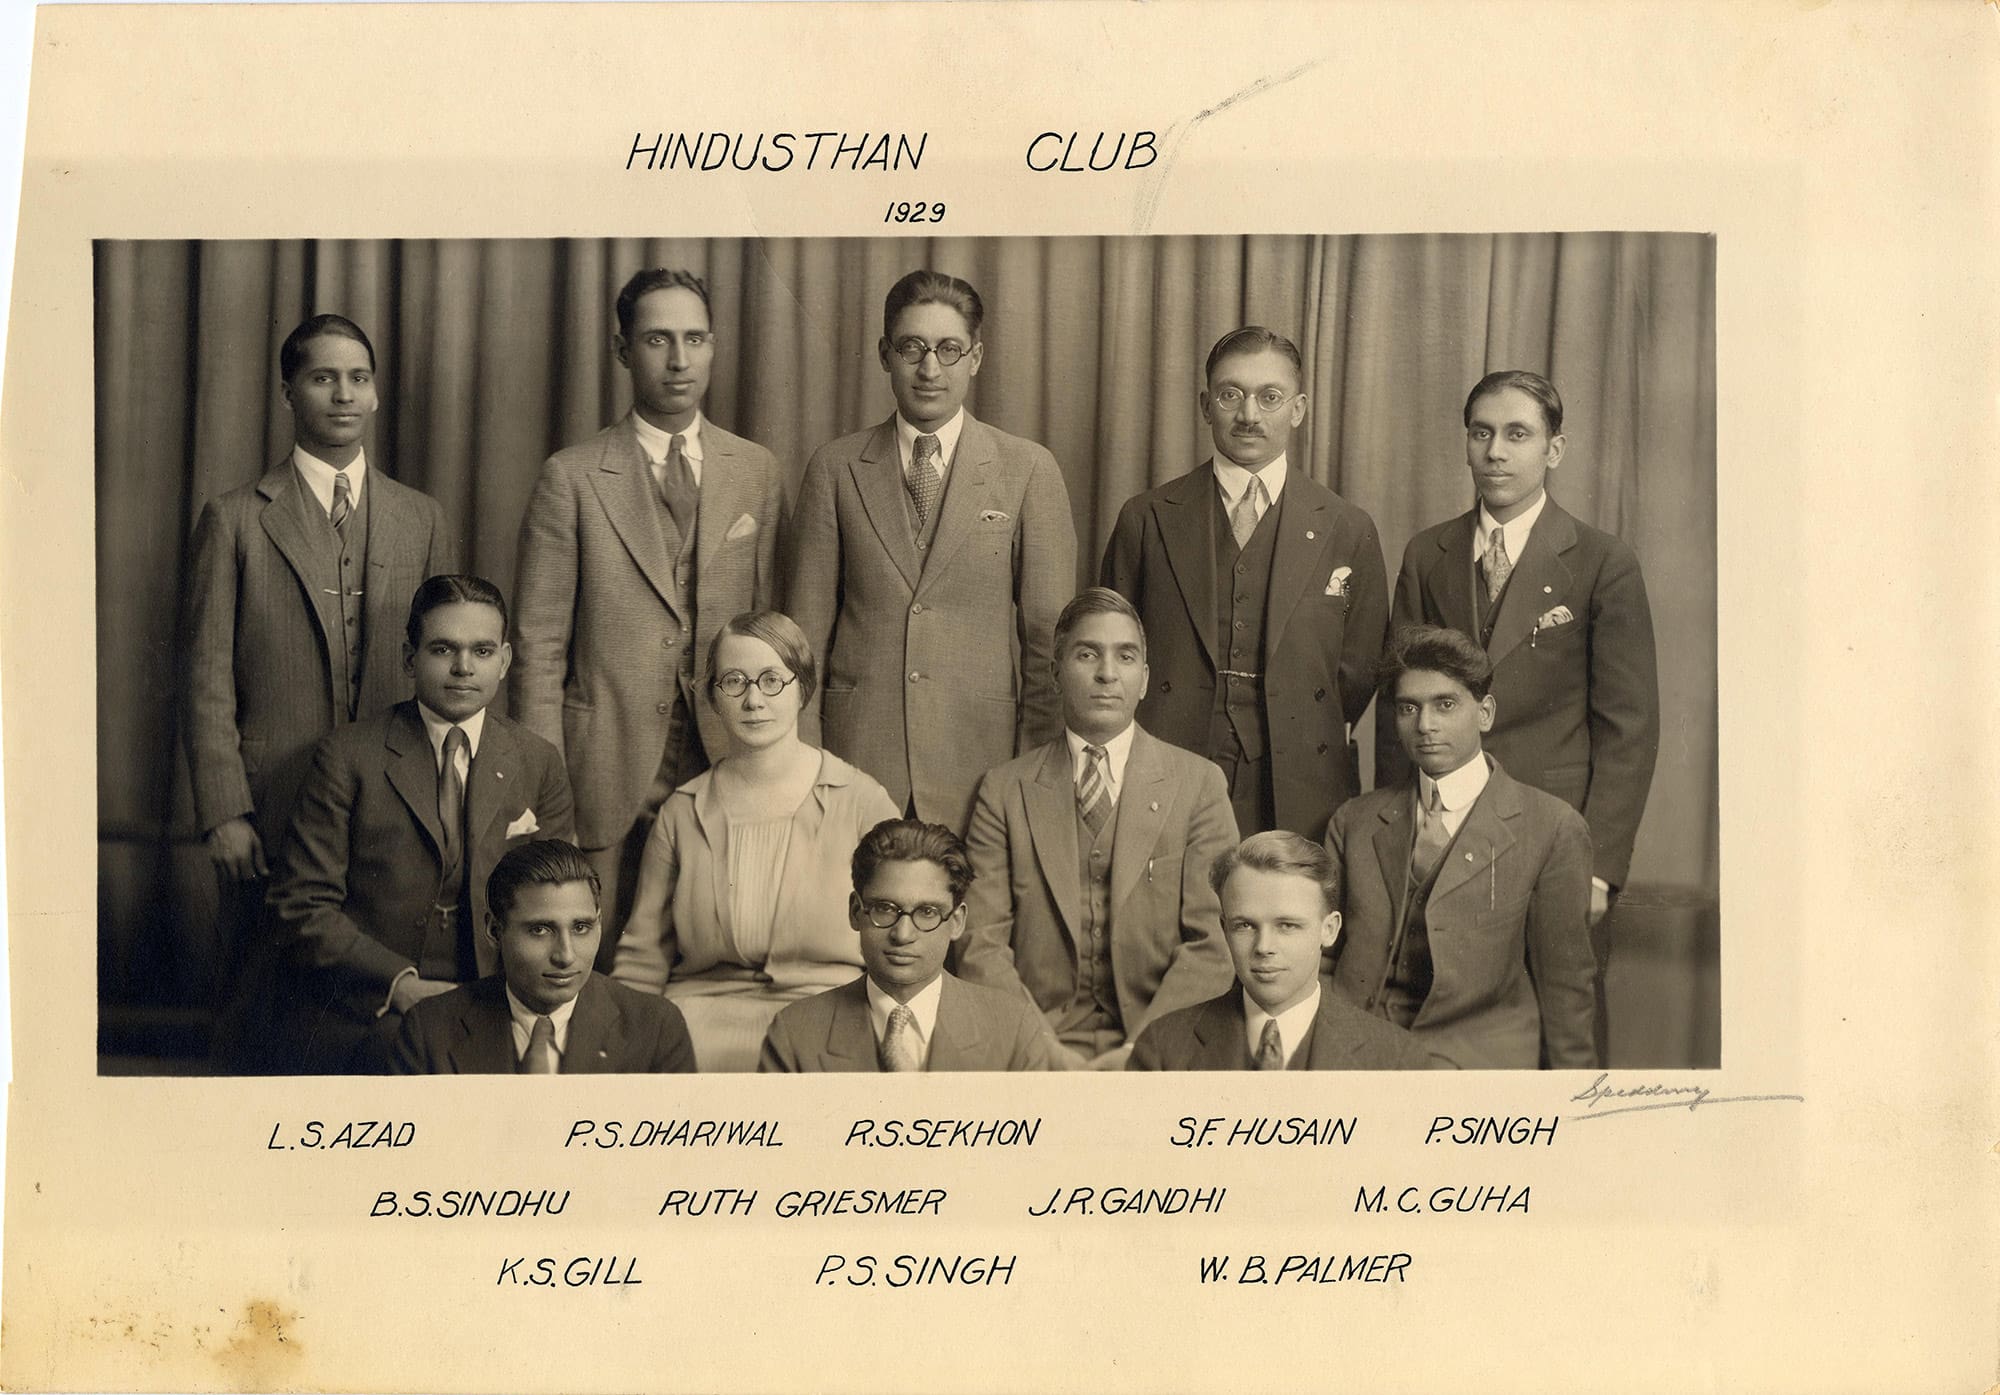 Members of Hindusthan Club pose for a group photograph.